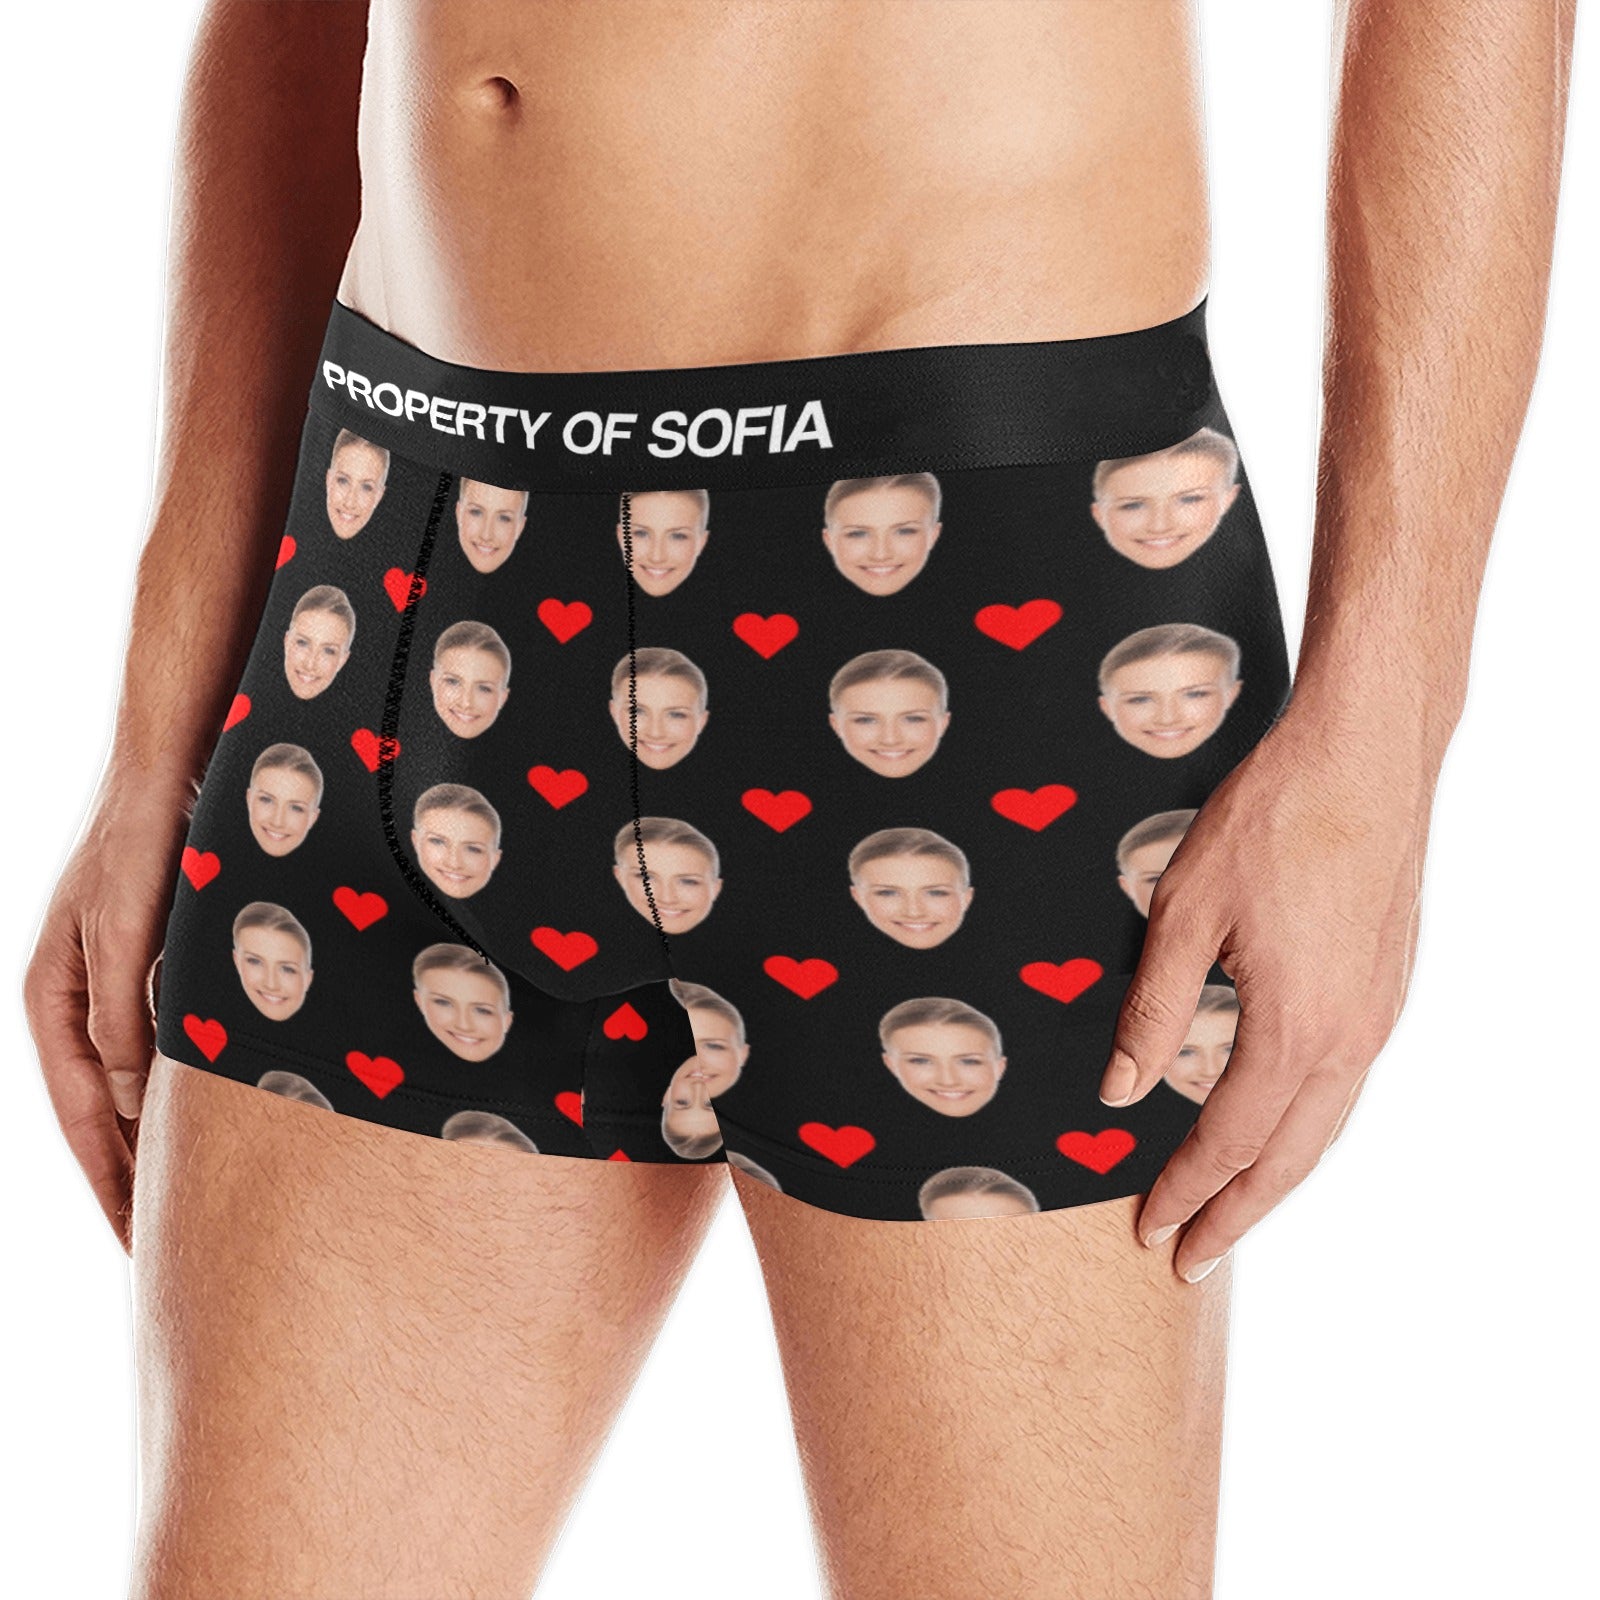 Property of my girlfriend - shop online for men funny underwear with print